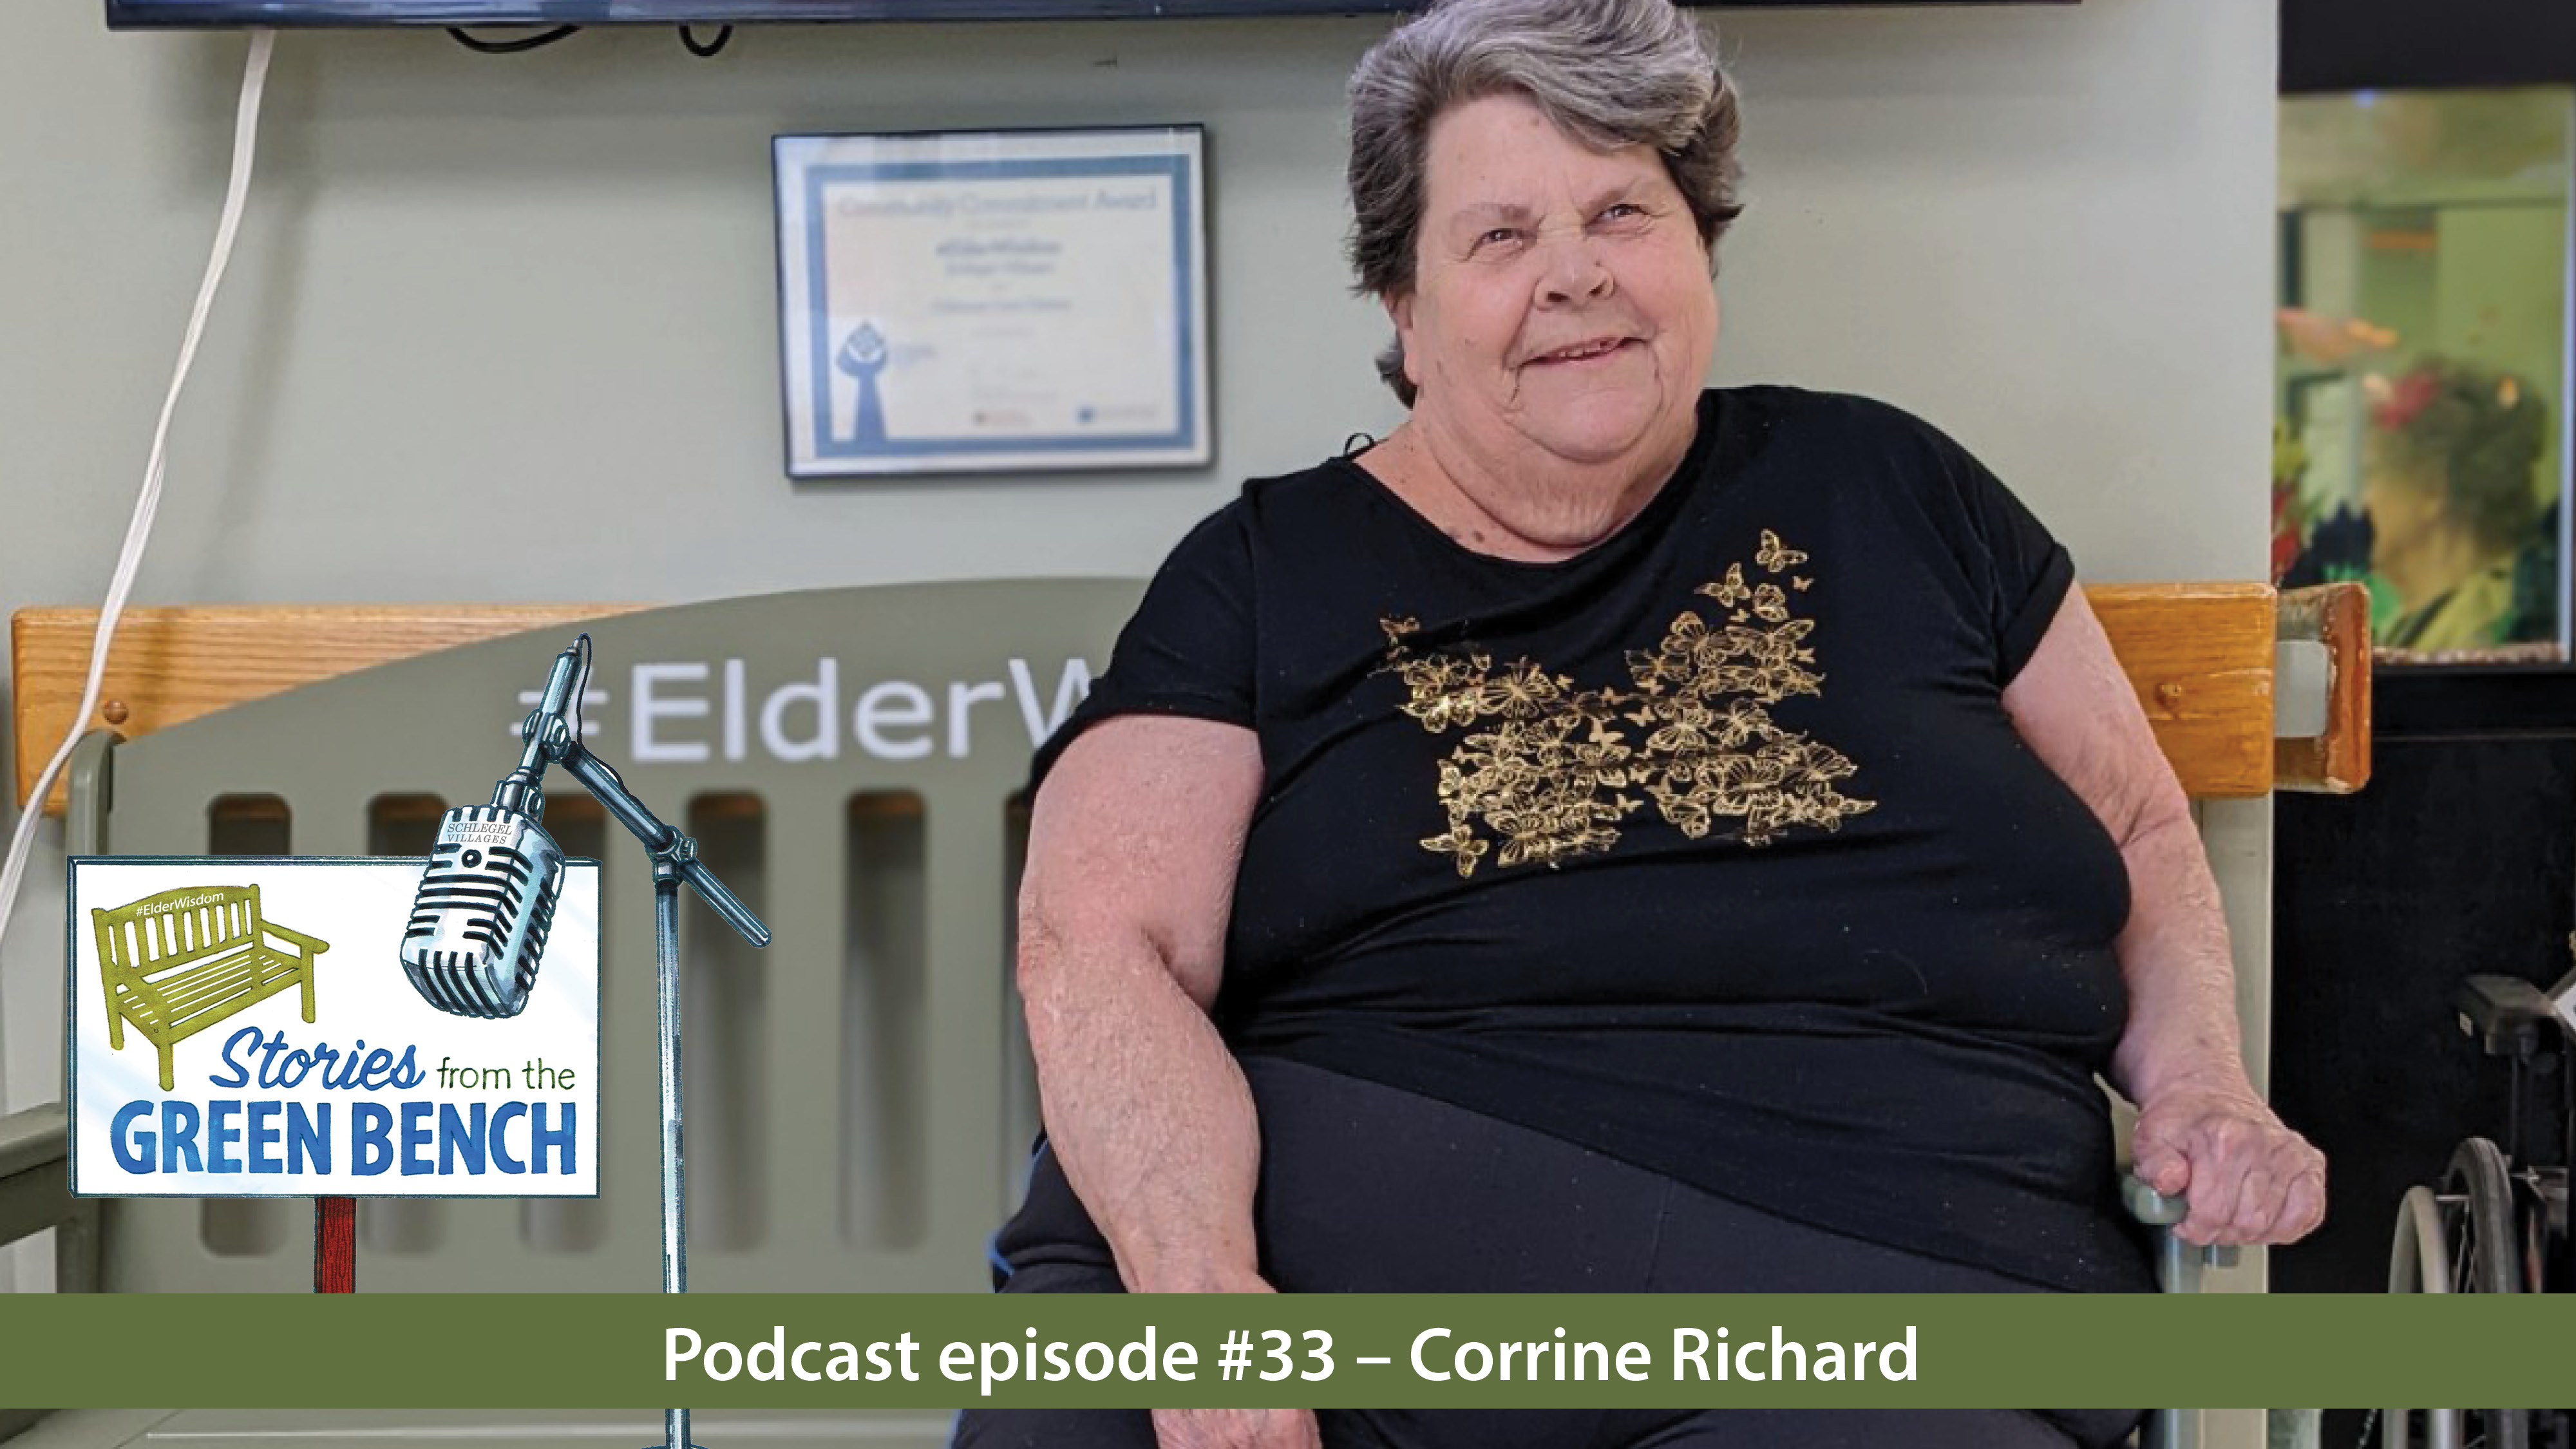 Corrine Richard shares her Story from the Green Bench on the #ElderWisdom podcast